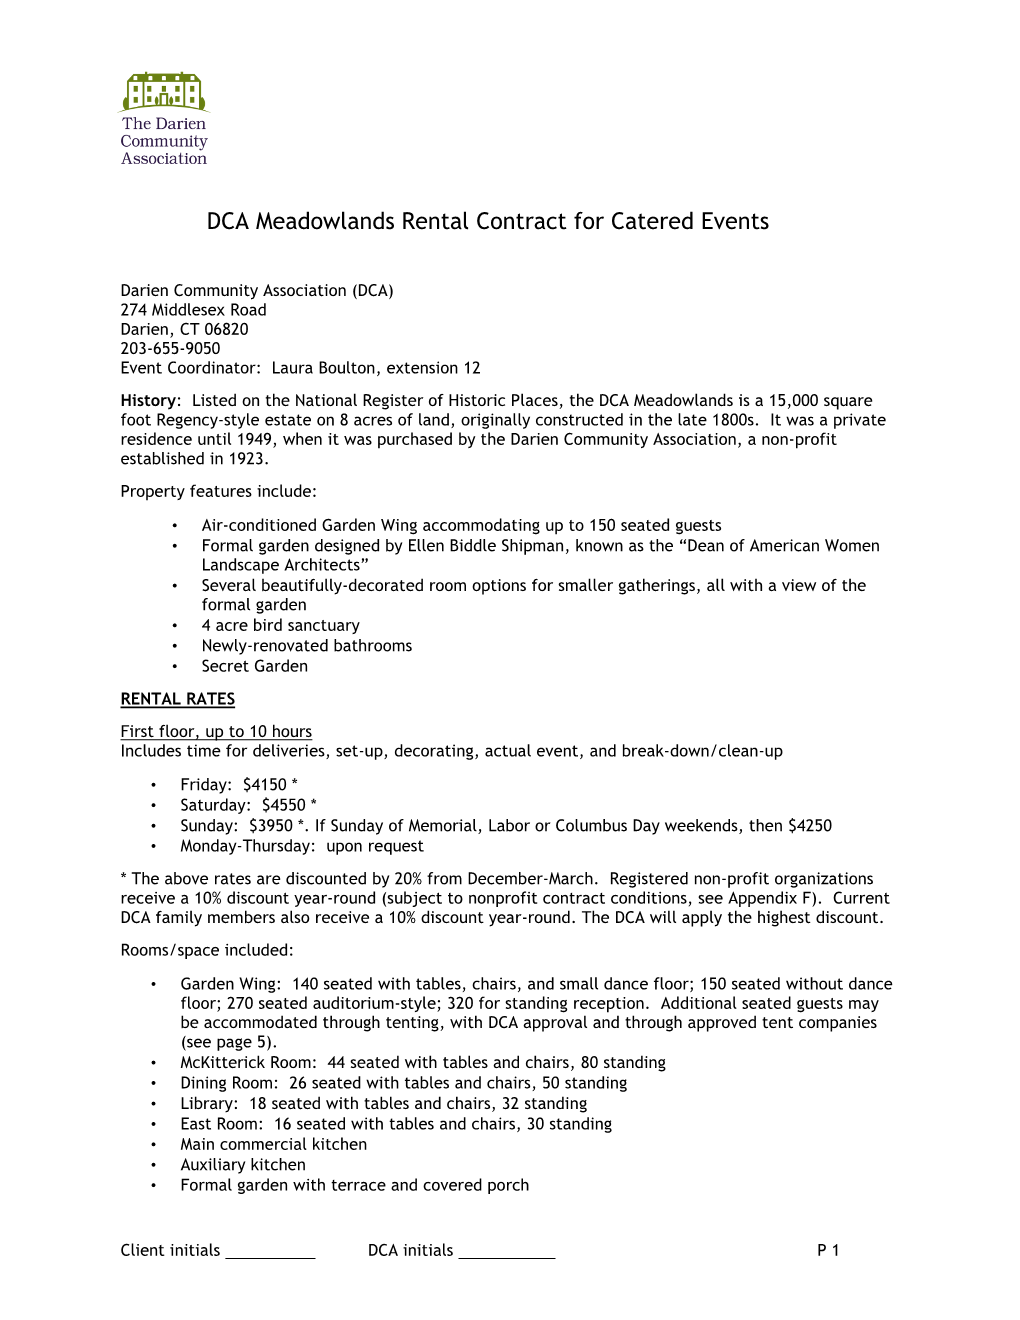 DCA Meadowlands Rental Contract for Catered Events